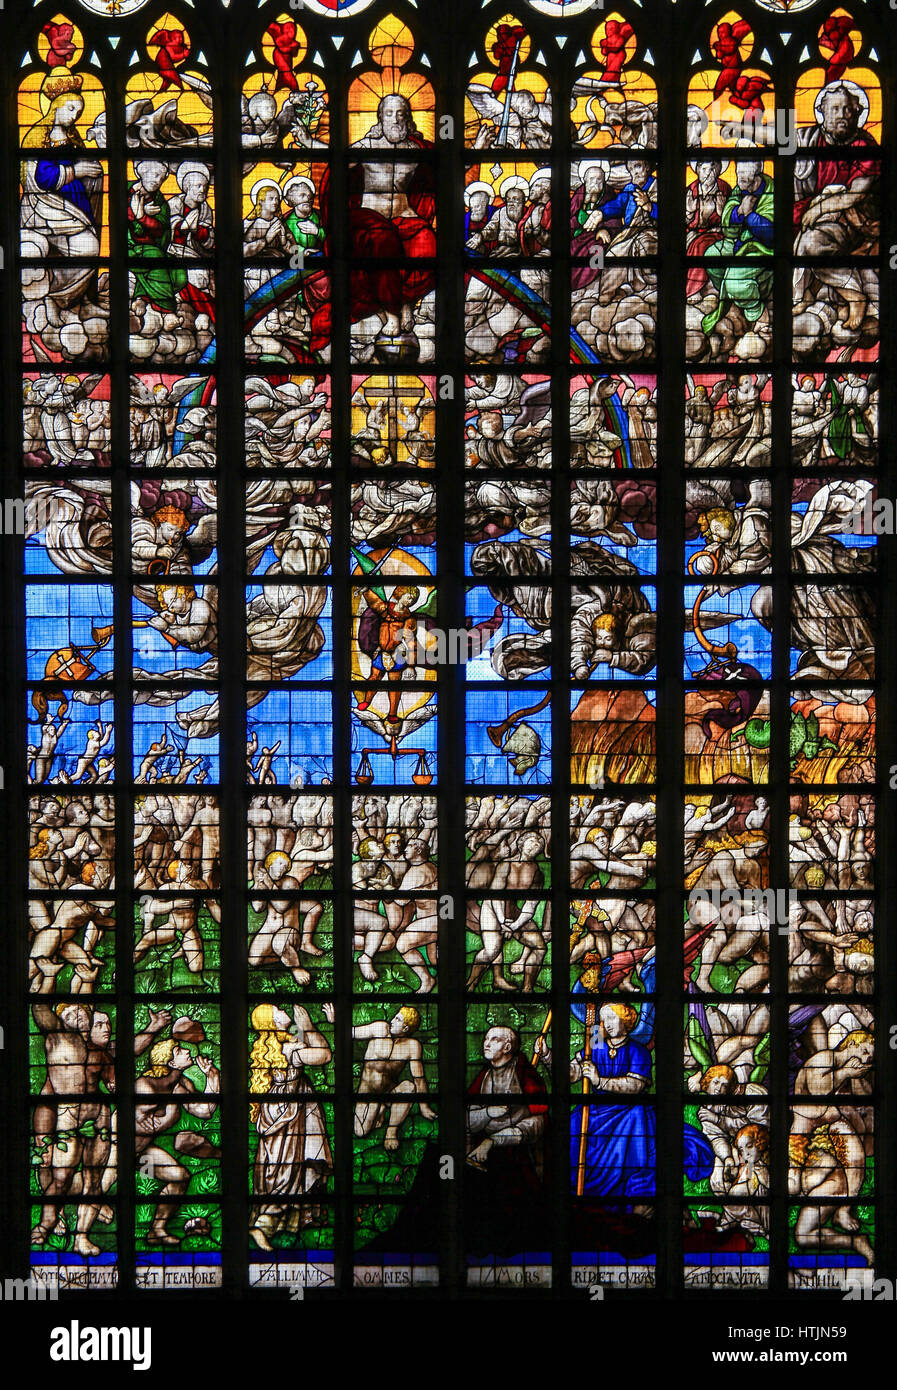 Stained glass window (1528) depicting the Last Judgment, in the Cathedral of Brussels, Belgium. Stock Photo